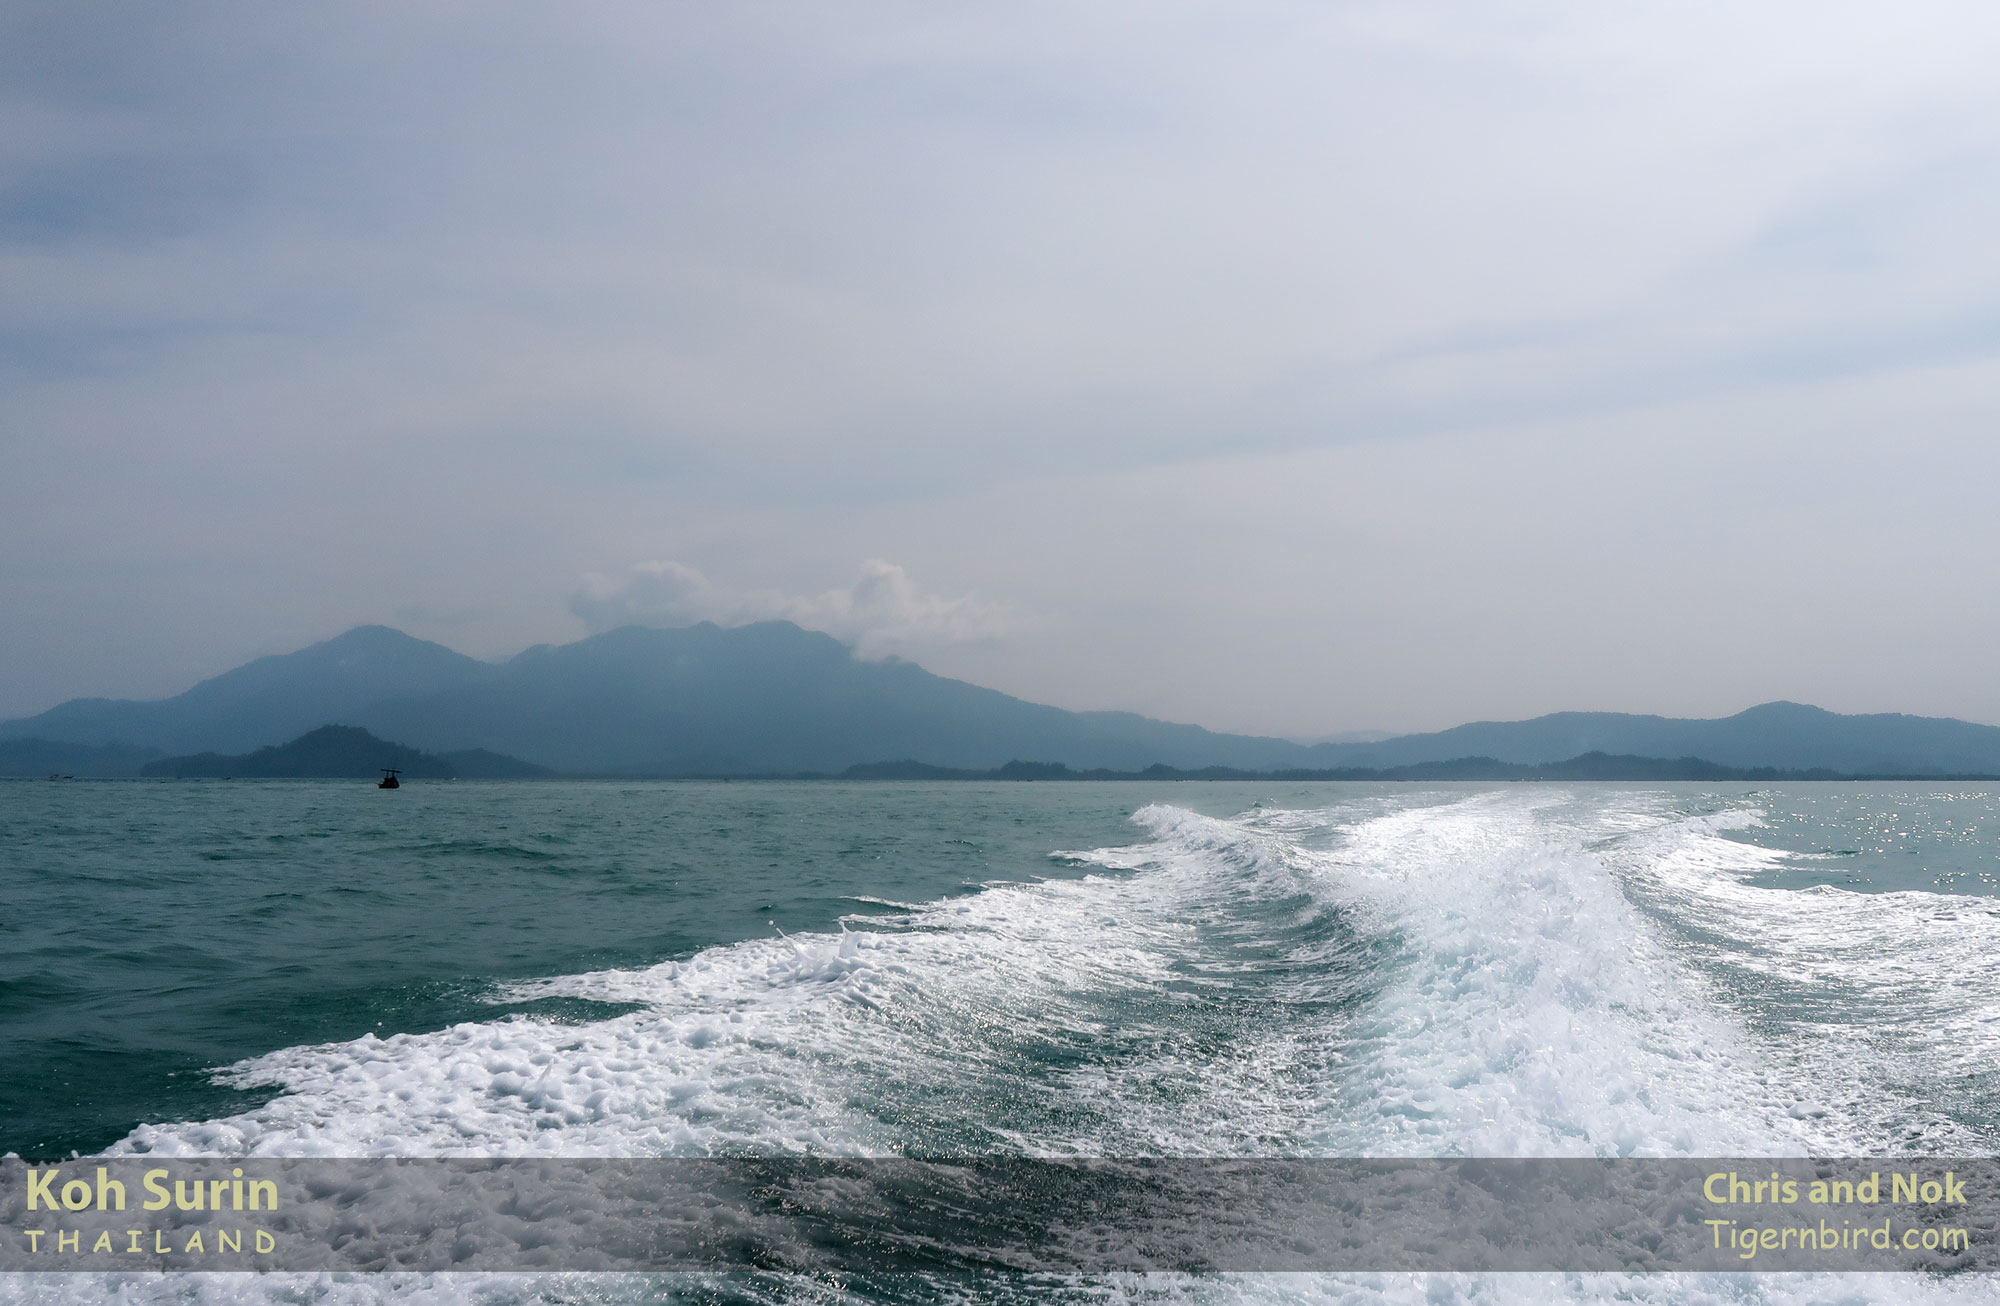 Speedboat wake in Andaman Sea on cloudy day with Thailand hills in background